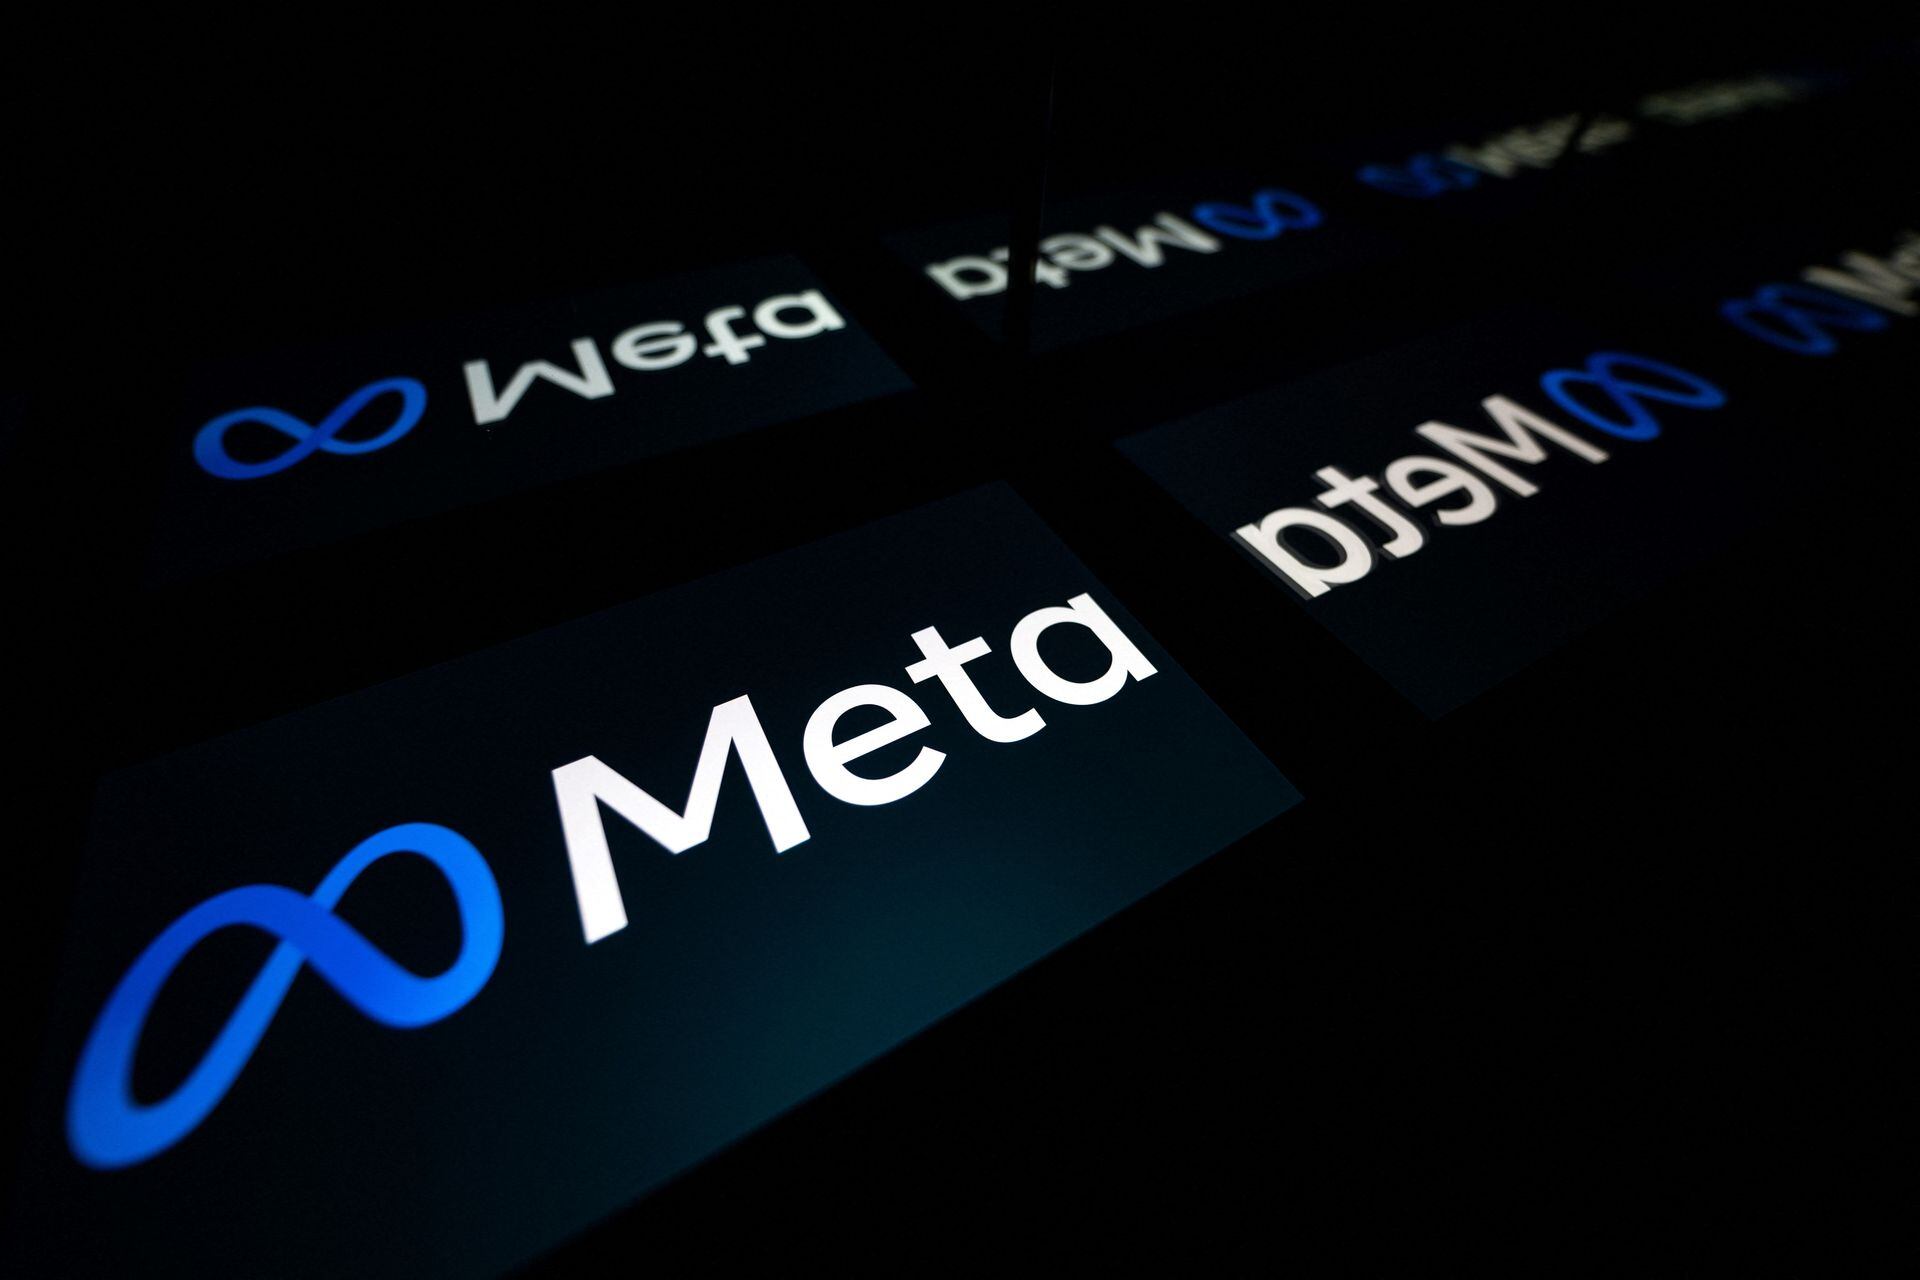 FILES) In this file photo taken on January 12, 2023 this picture taken in Toulouse, southwestern France shows a tablet displaying the logo of the company Meta. - Meta on May 3, 2023 warned that hackers are using the promise of generative artificial intelligence like ChatGPT to trick people into installing malicious code on devices. (Photo by Lionel BONAVENTURE / AFP)